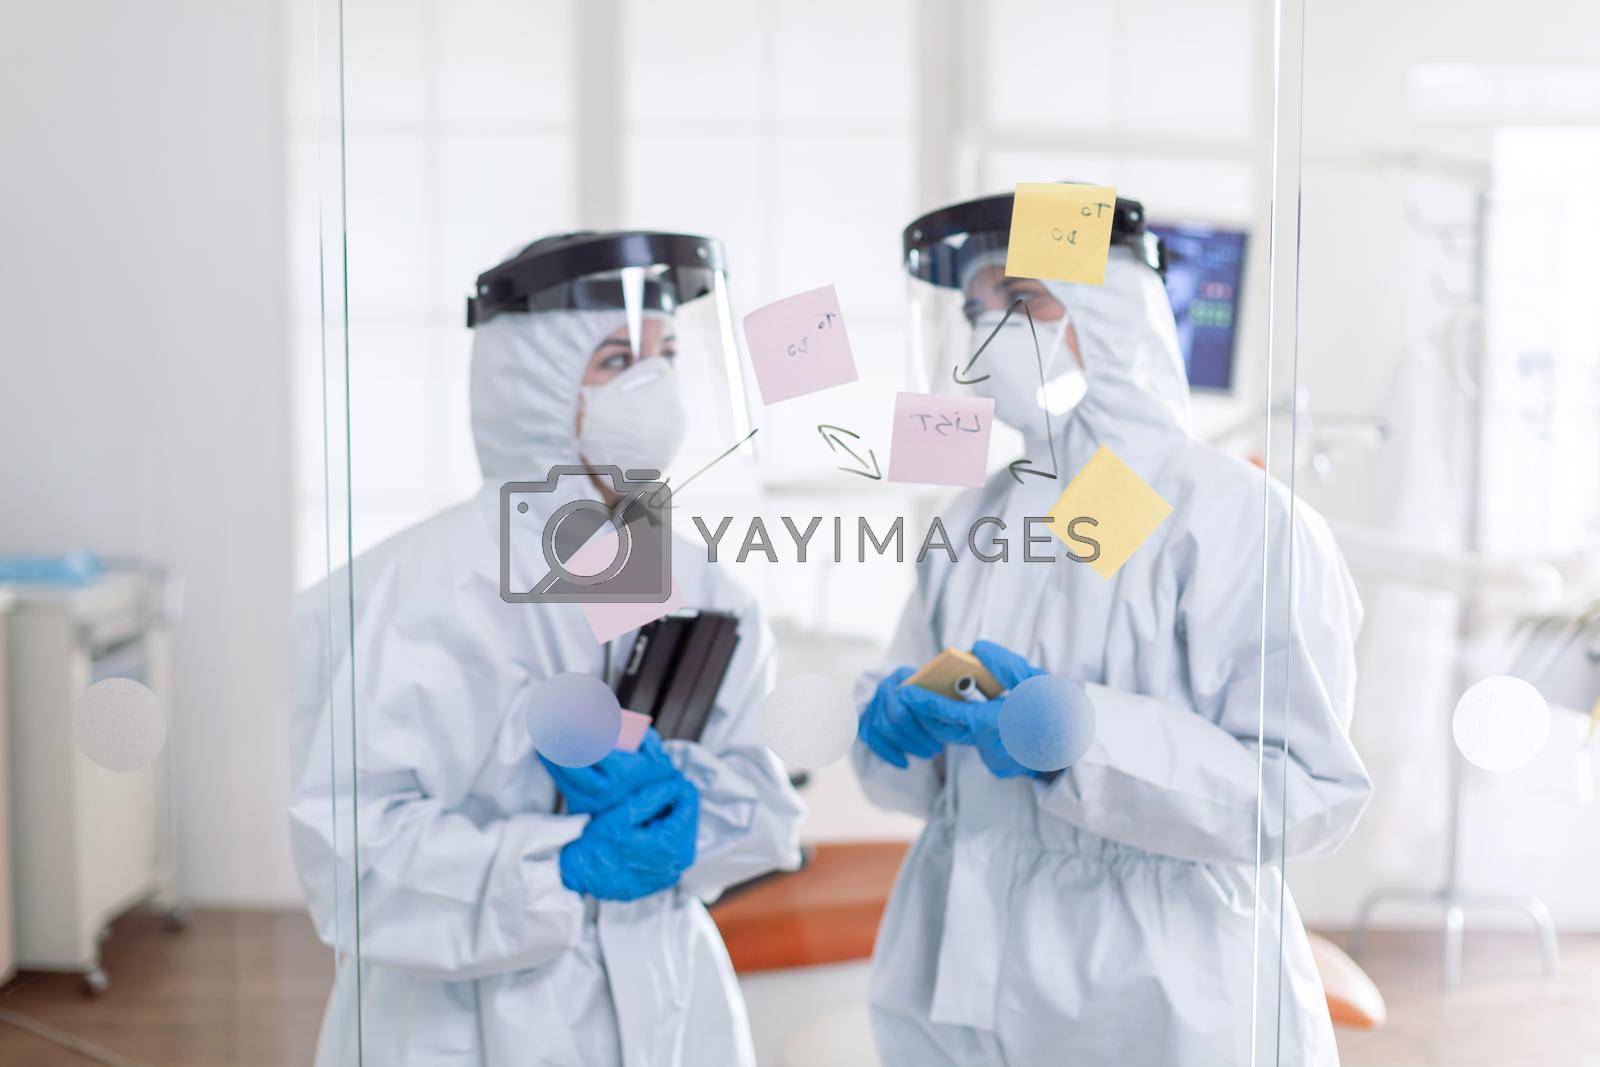 Dentist coworkers talking about teeth issues wearing pee suit as safety precauiton for covid-19. Medical team in stomatology office wearing coverall in dental office writing ideas on sticky notes.